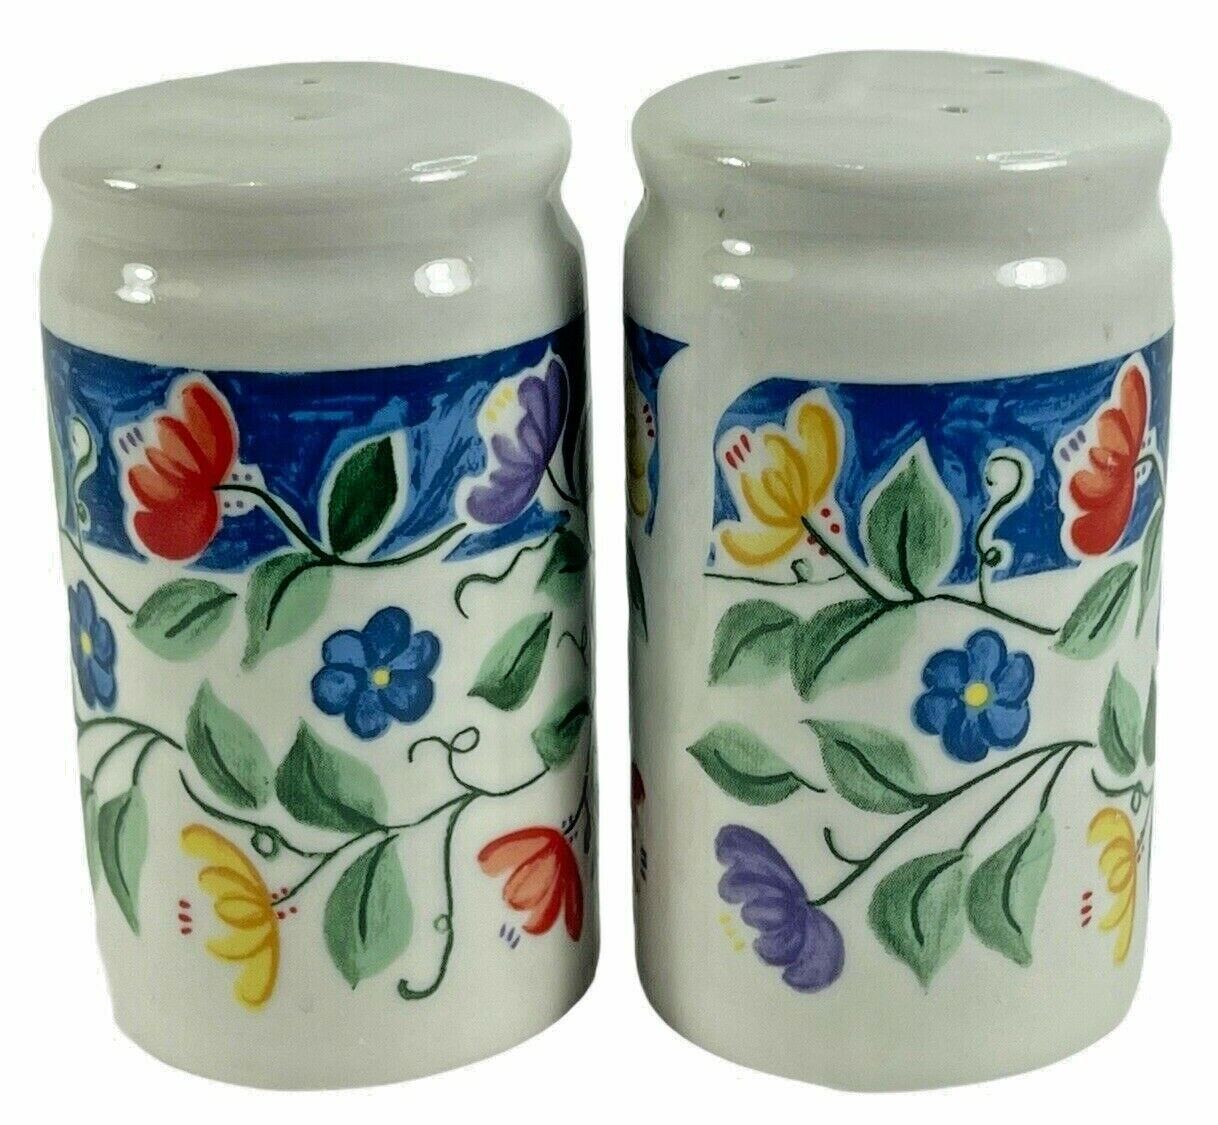 Vintage Flowers Floral Tulips Daisy Spring Colorful Salt and Pepper Shakers